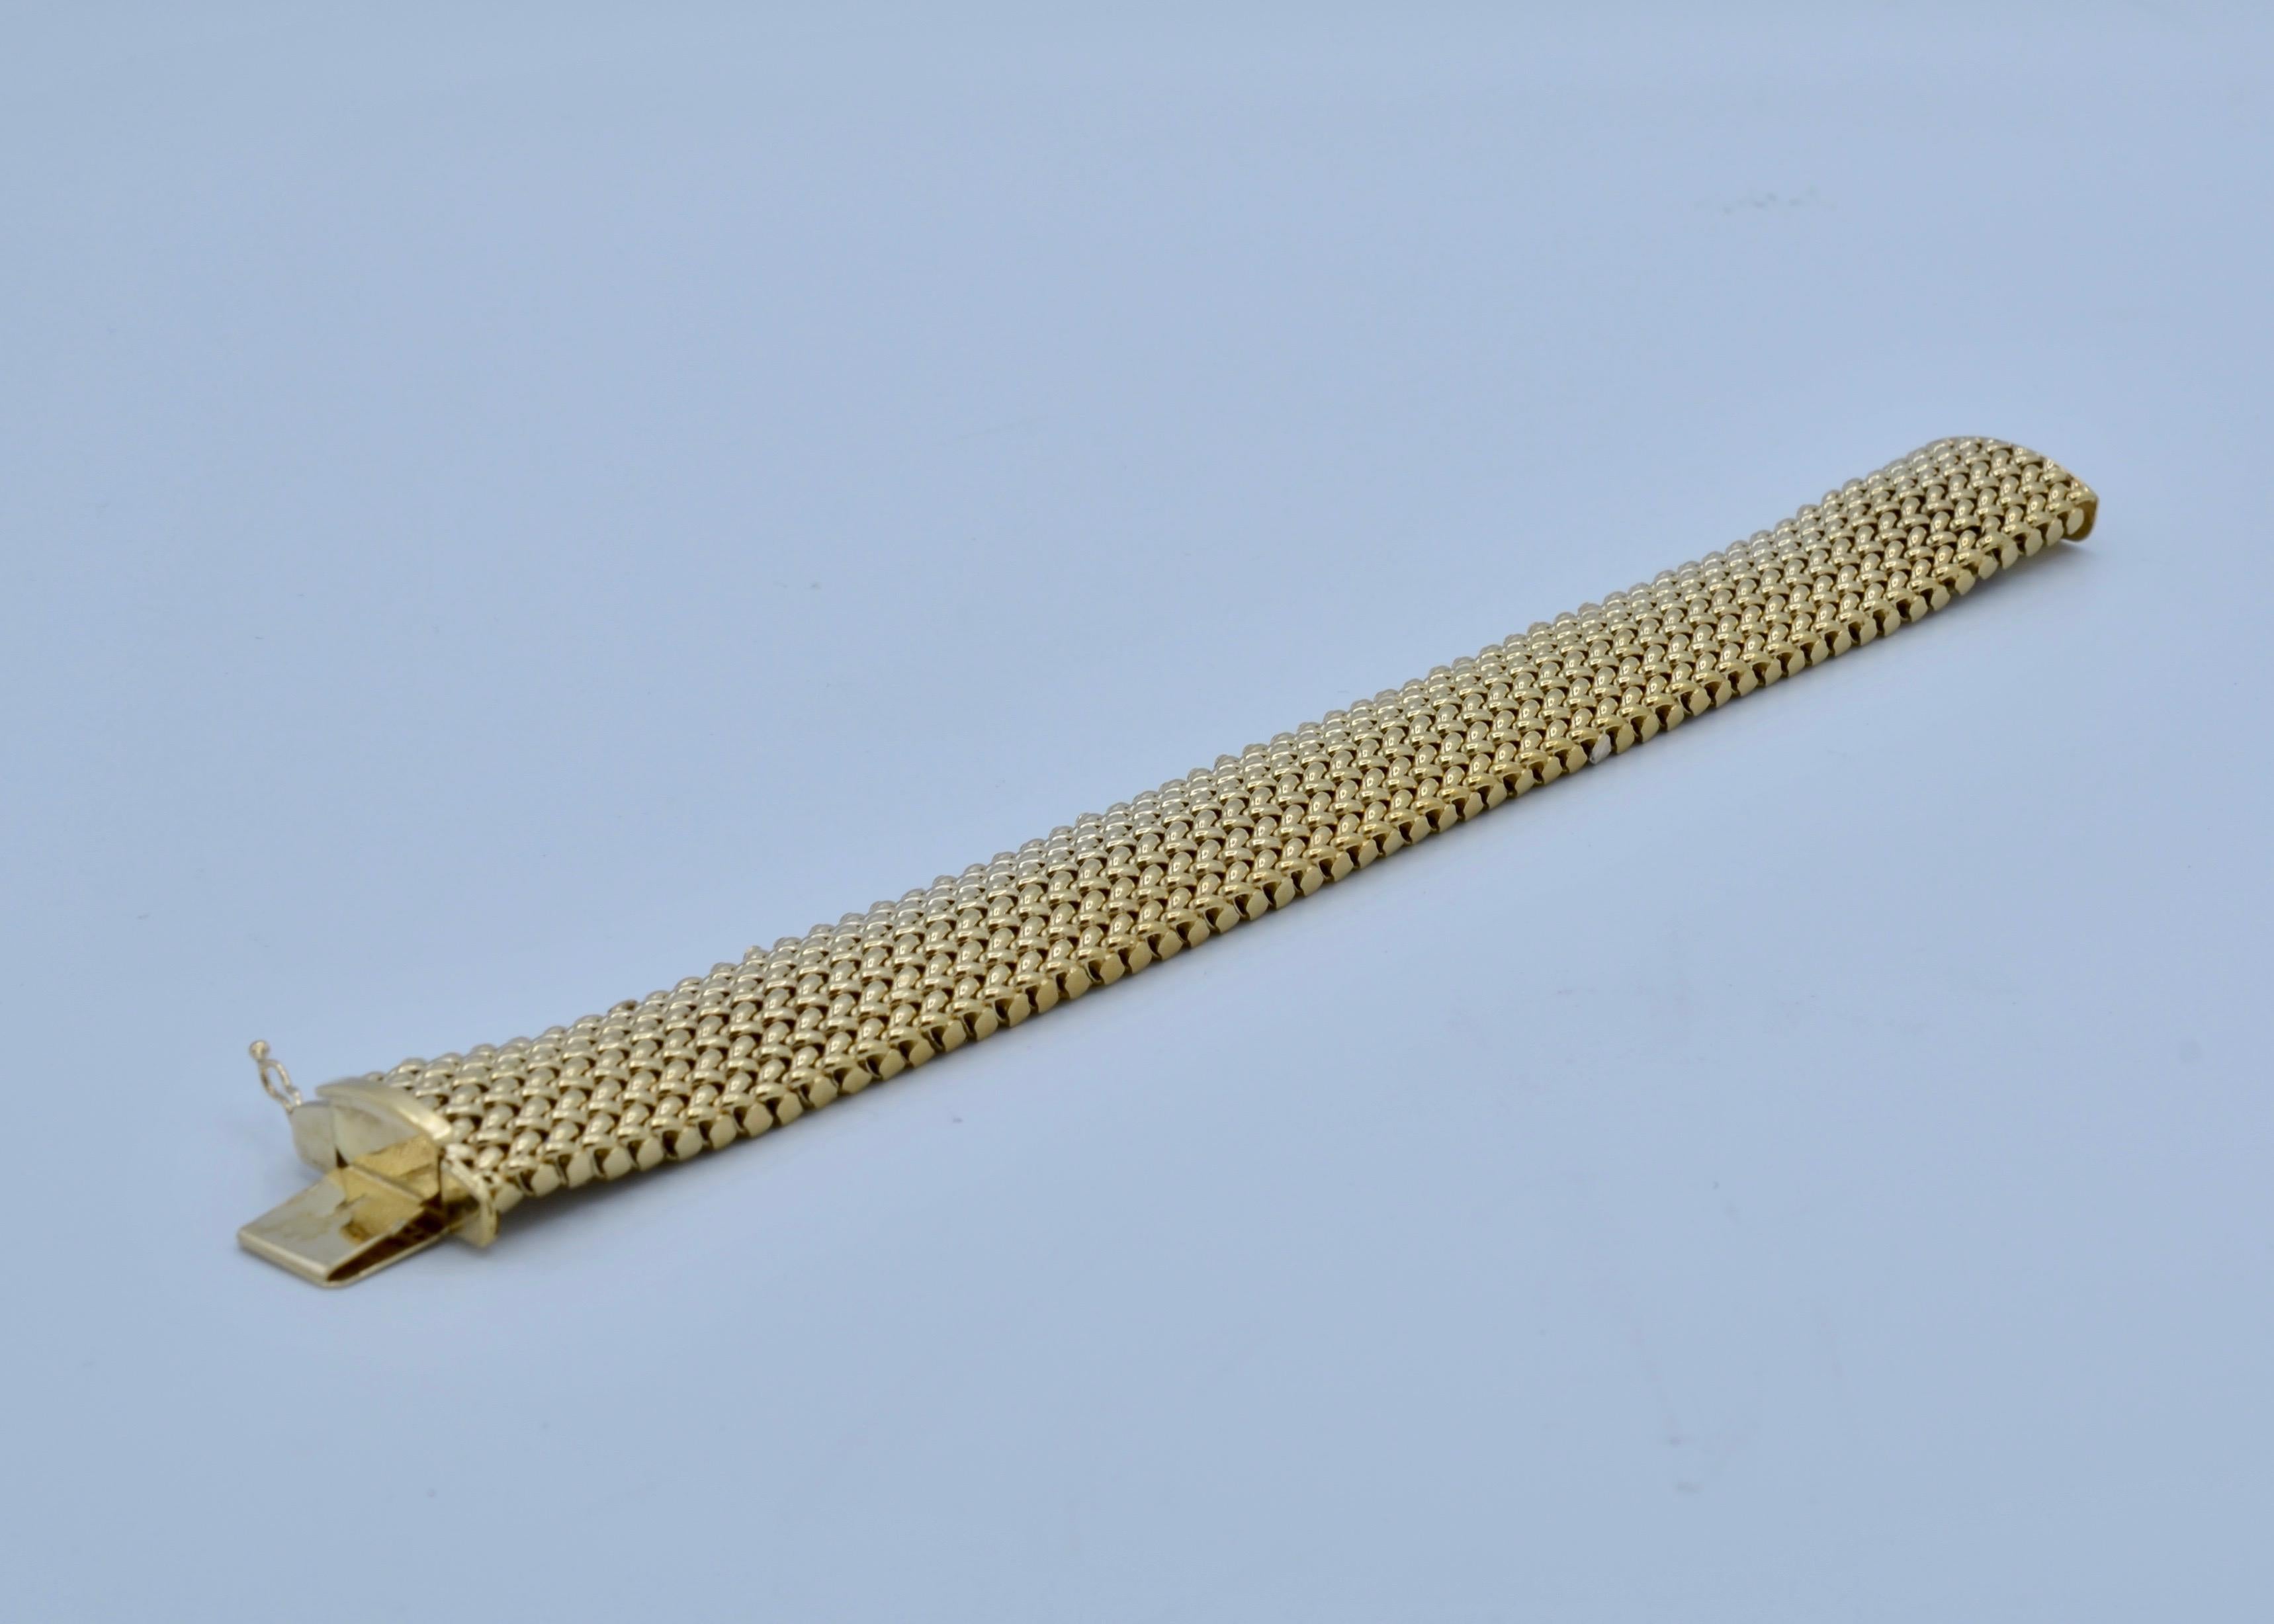 This stunning bracelet is a warm golden glow mesh woven together to create a flexible, comfortable and beautiful piece of jewelry. Wear it alone or stack with your favorite watch and other bracelets for a reminder of your Mom and Grandmother with